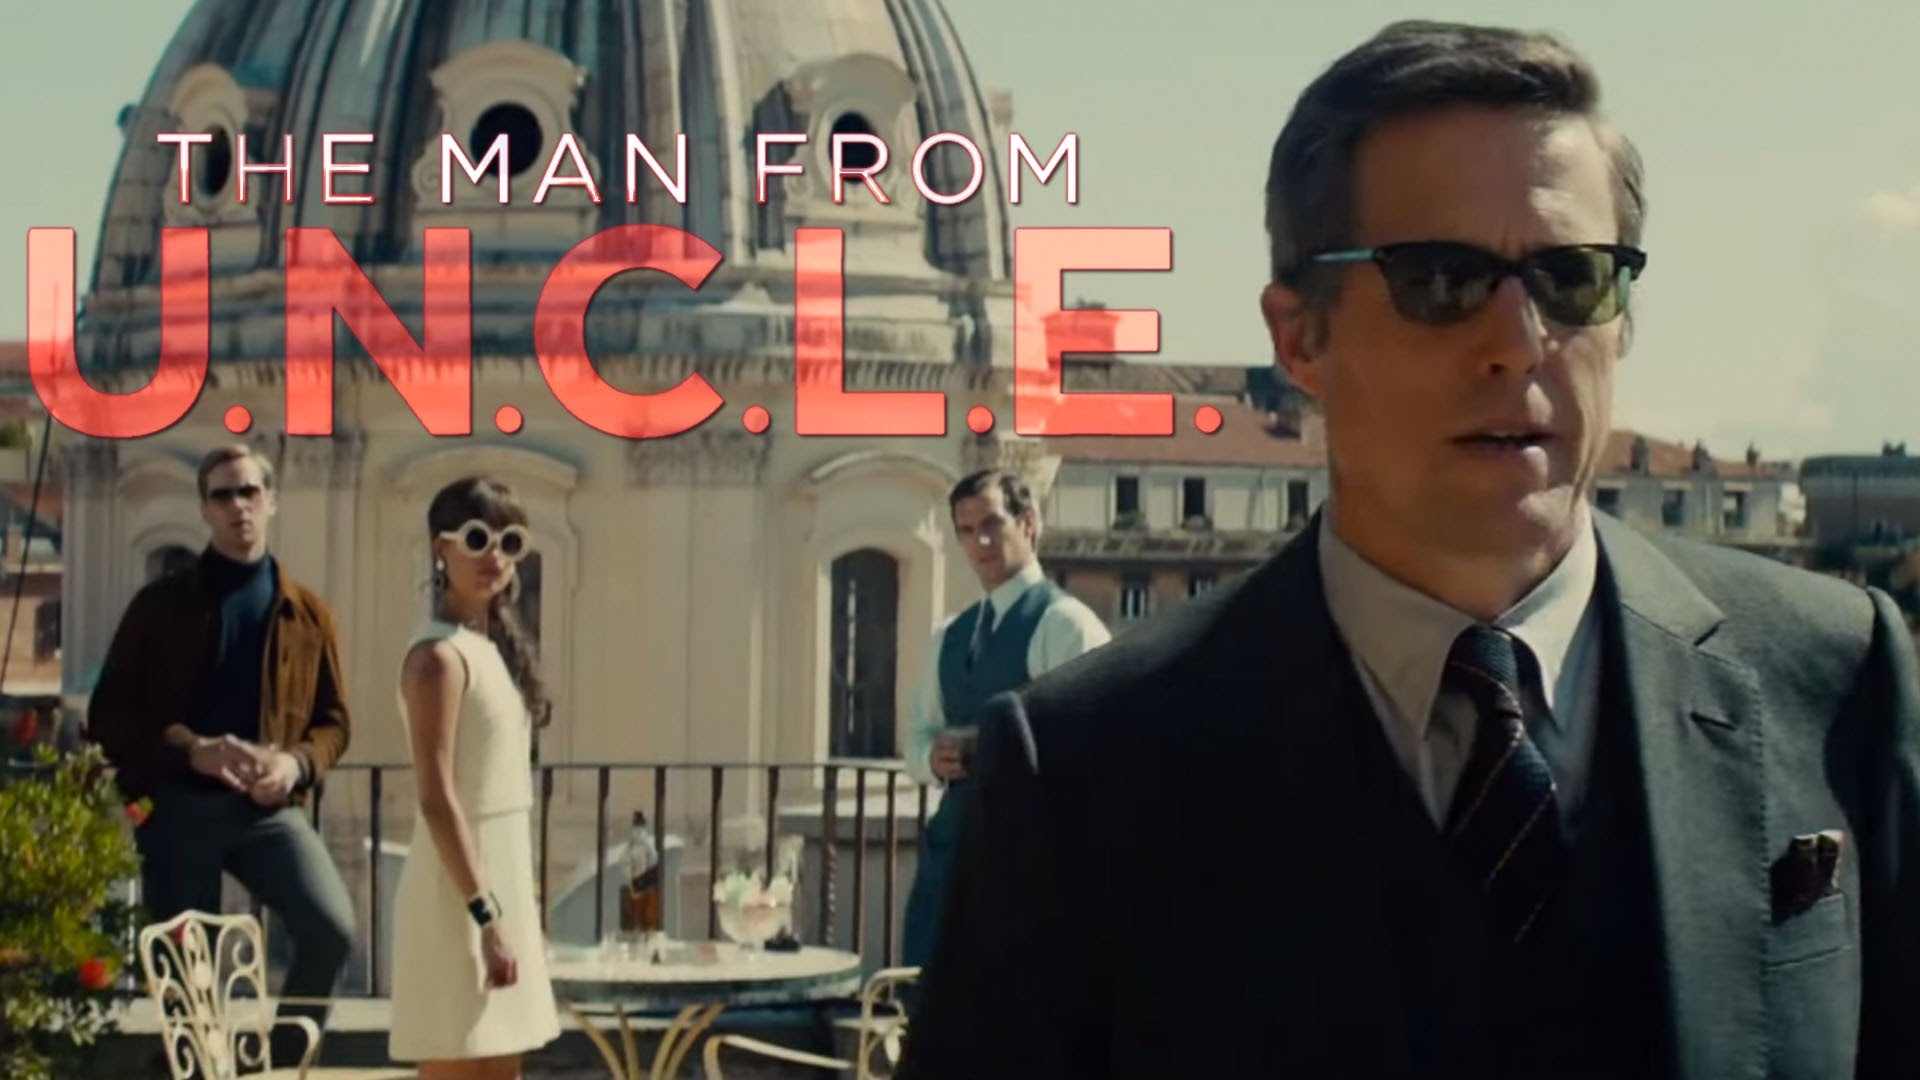 The Man from U.N.C.L.E., Second trailer, AMC movie review, HD wallpapers, 1920x1080 Full HD Desktop